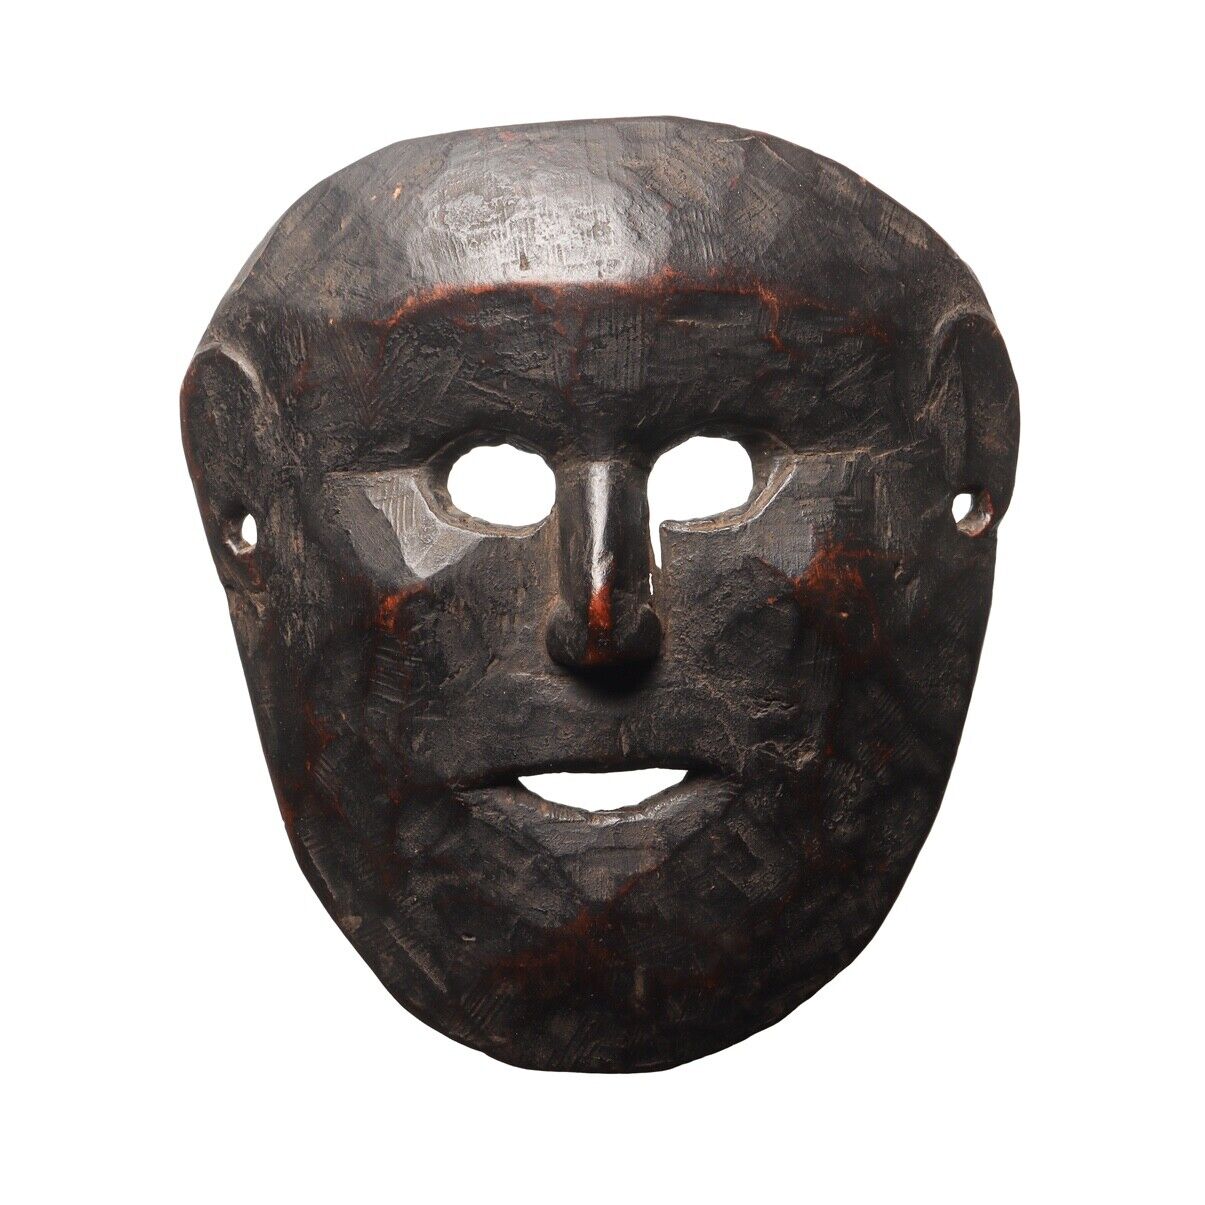 Old Himalayan Mask, Nepal, Ethnographic and Tribal Art GREAT PROVENANCE